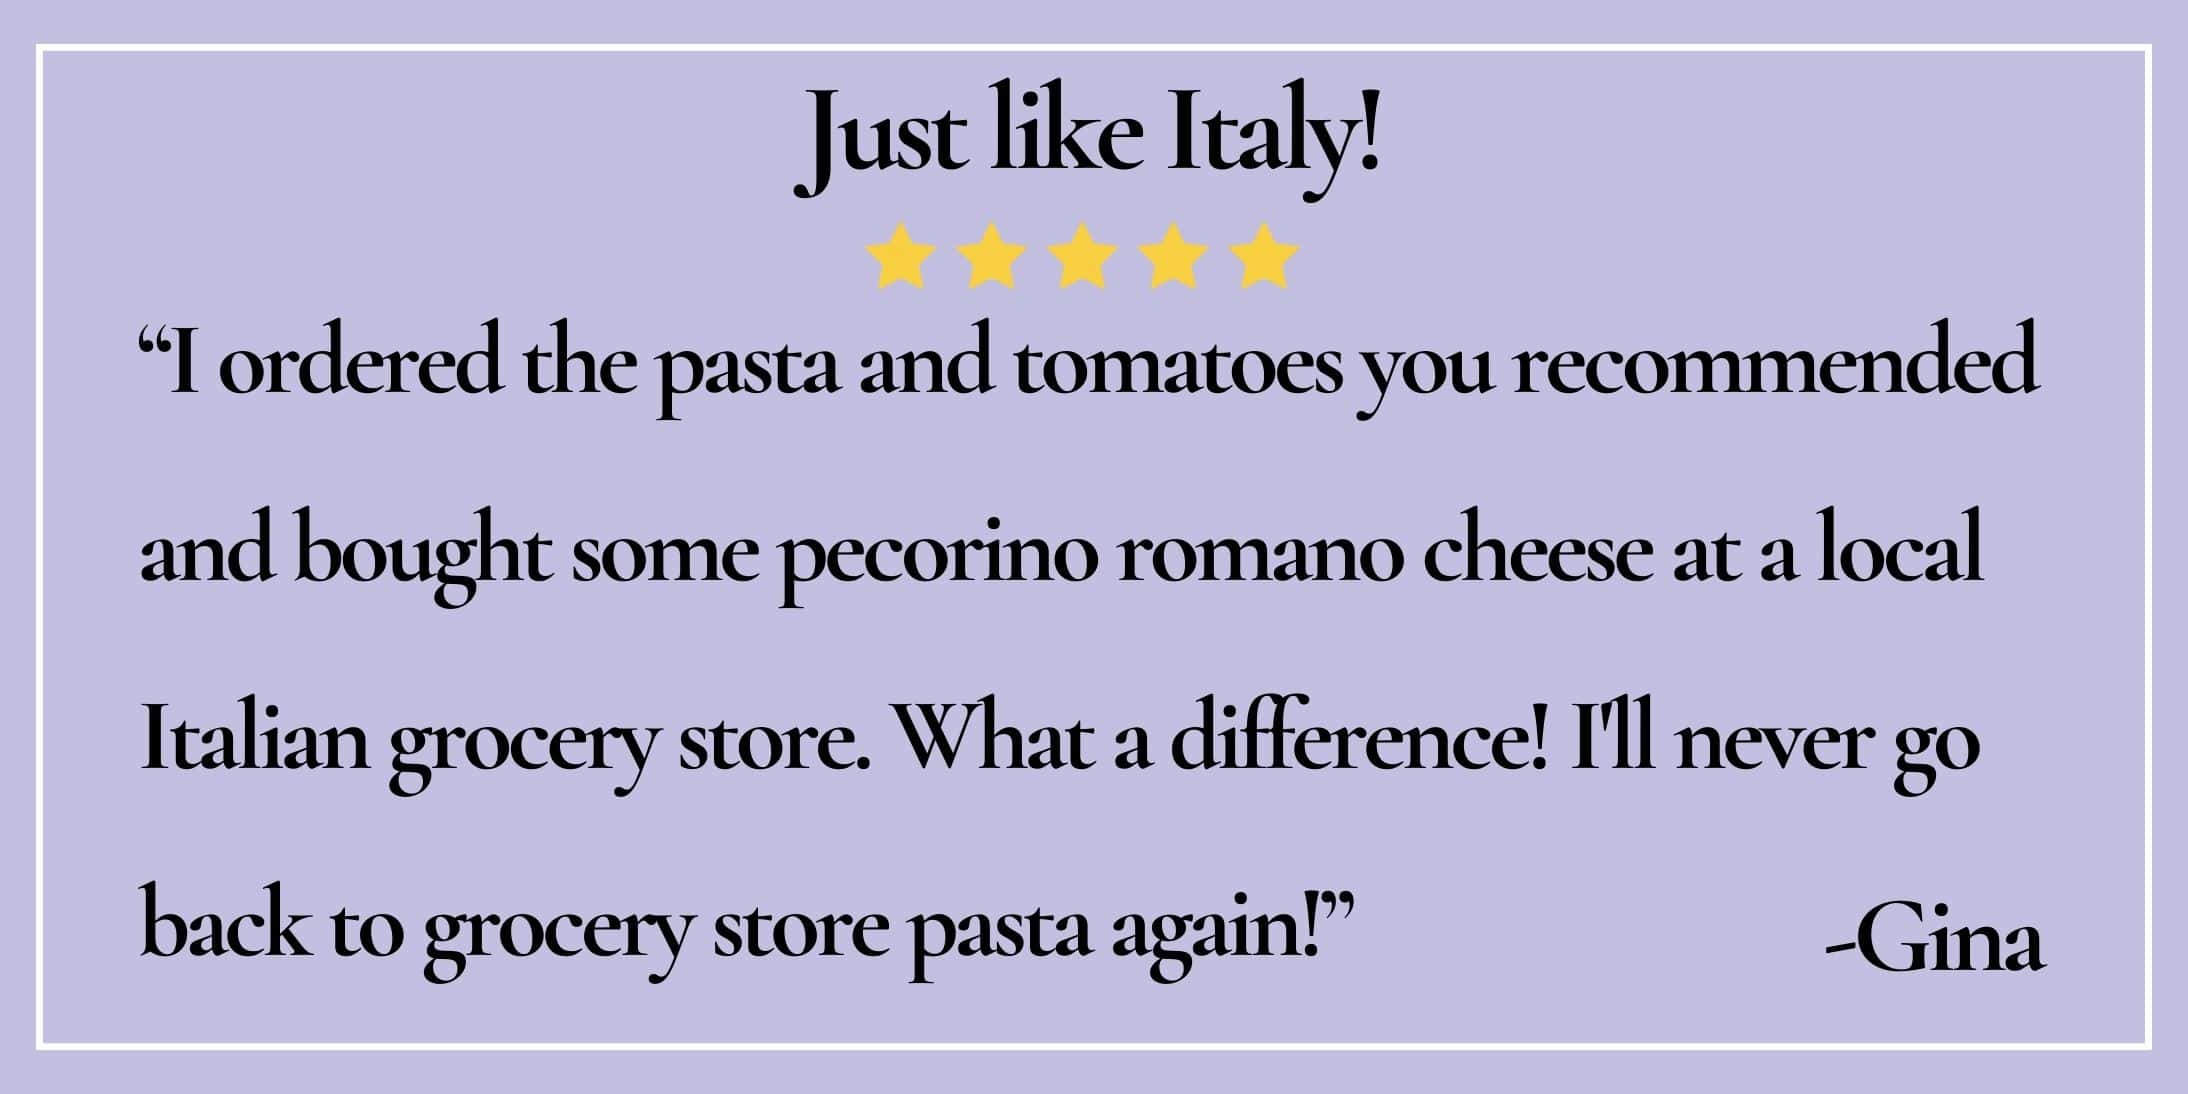 text box with paraphrase: Just like Italy! What a difference! I'll never go back to grocery store pasta again! -Gina